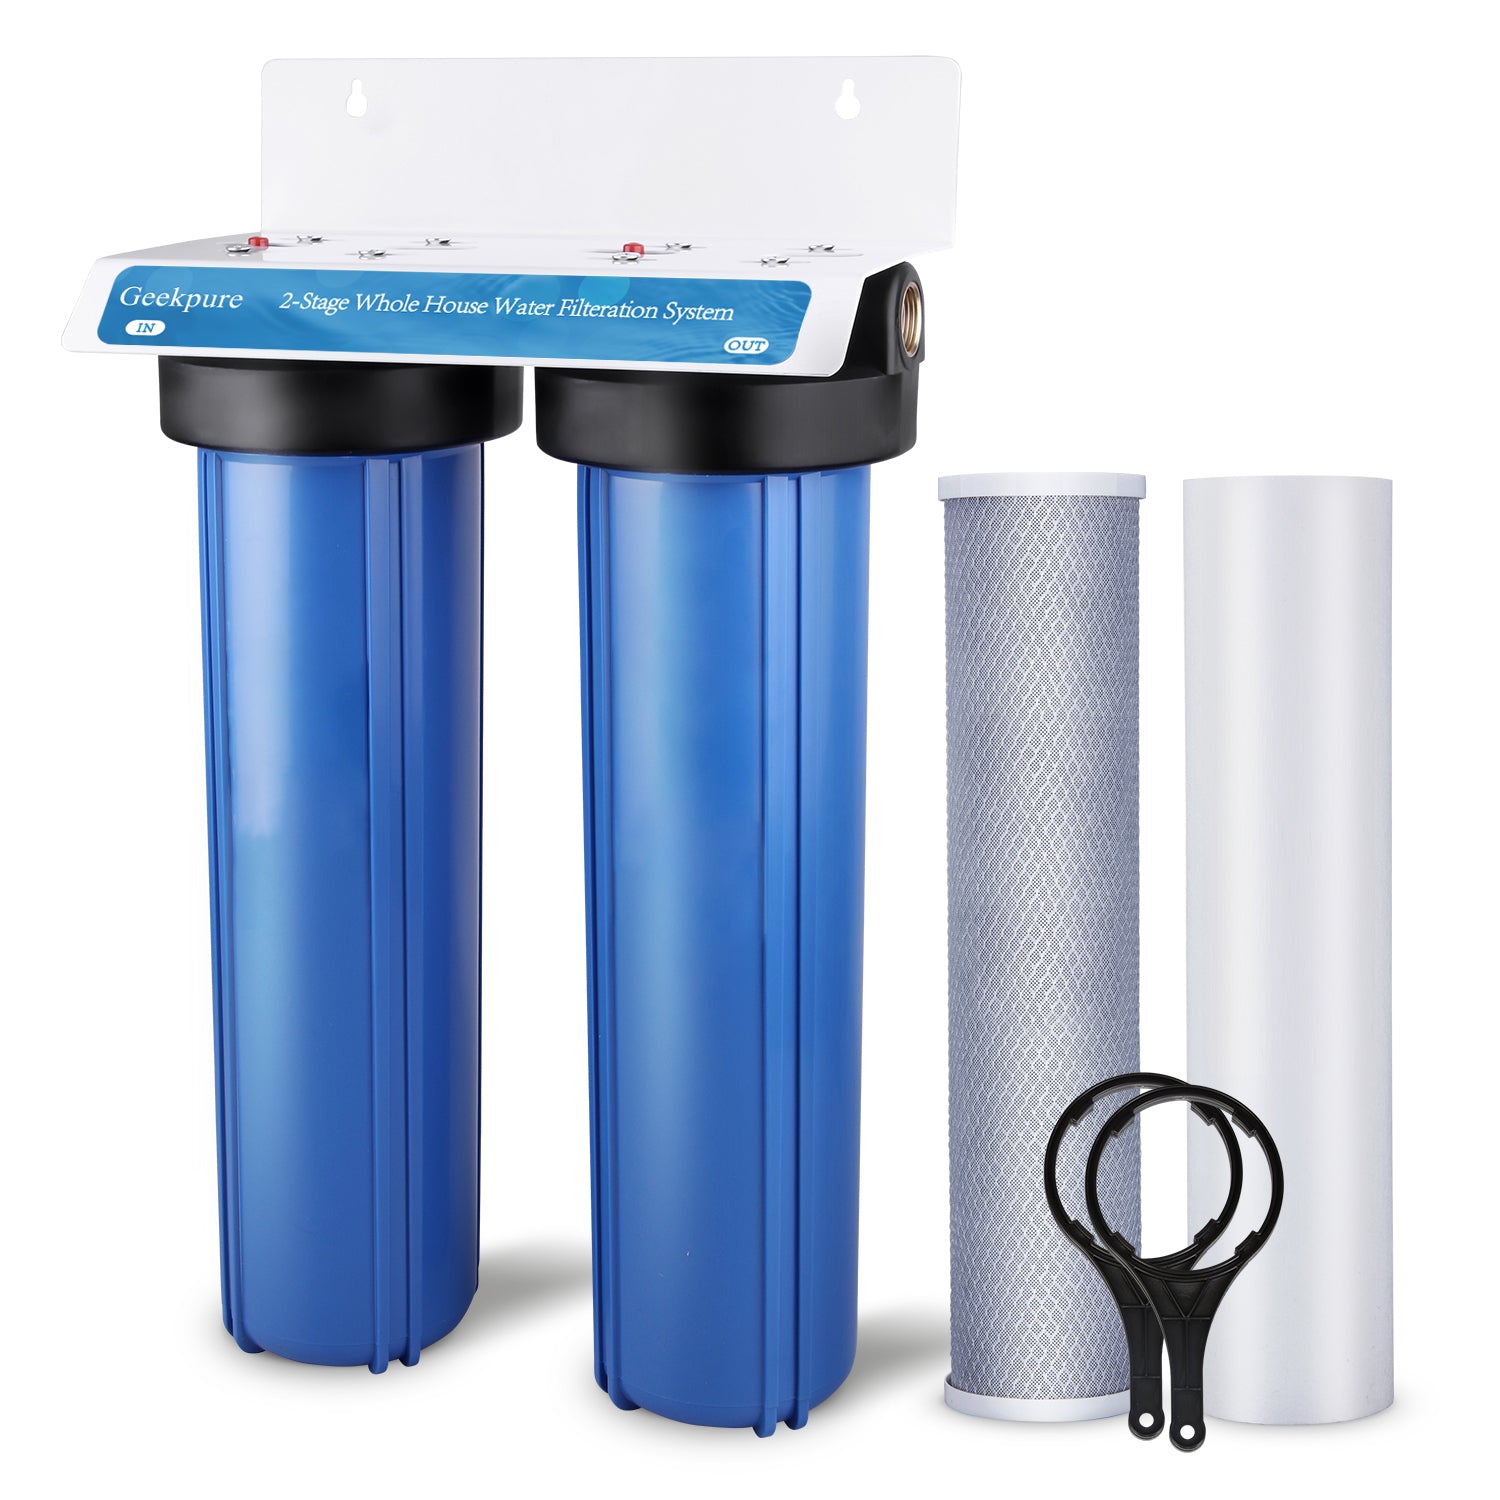 Whole House Water Filtration System – Geekpure Water Group